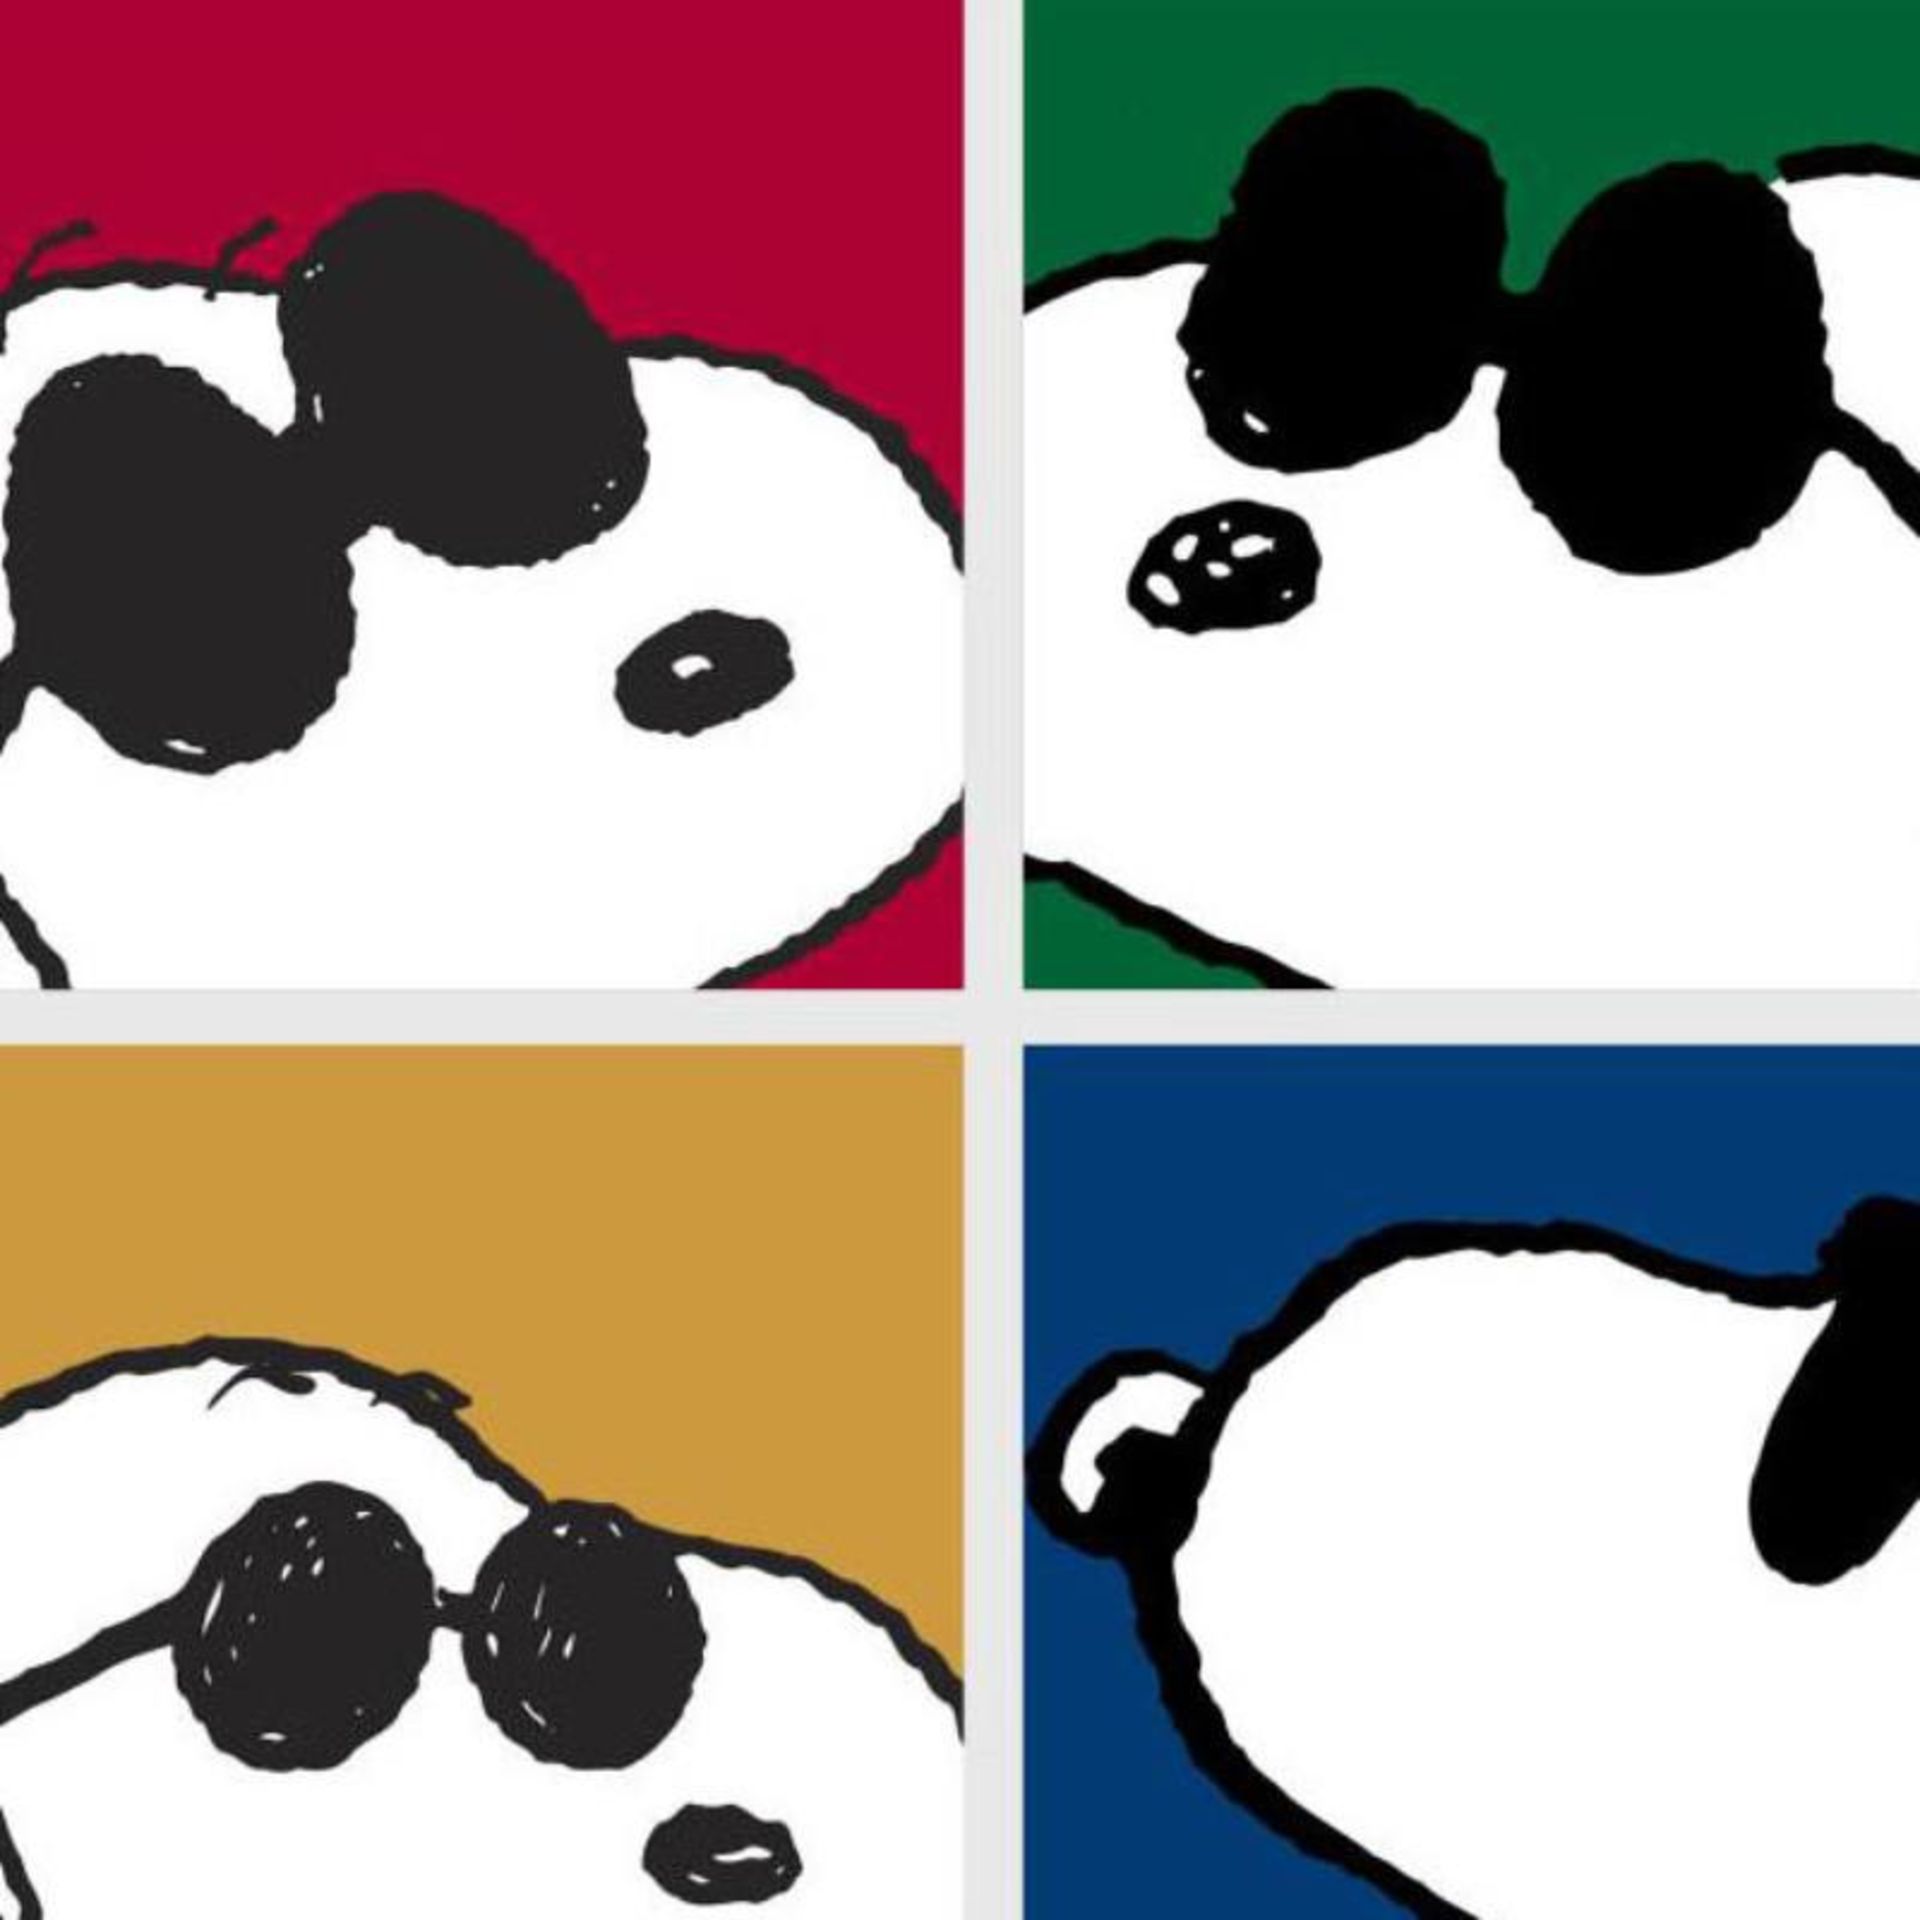 Snoopy: Faces by Peanuts - Image 2 of 2